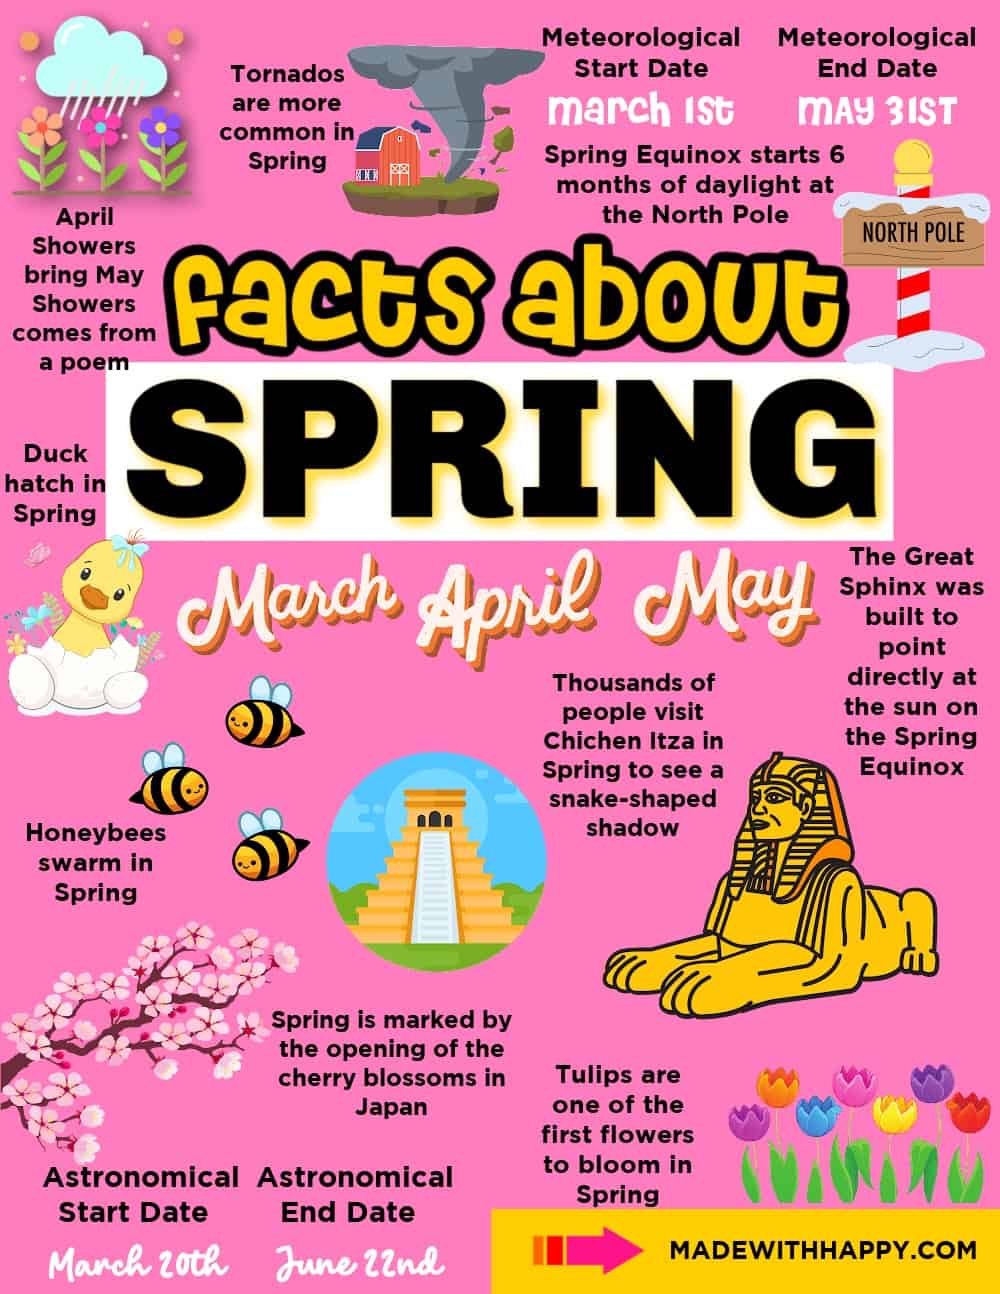 The most unexpected facts about spring that will be interesting for both  adults and children